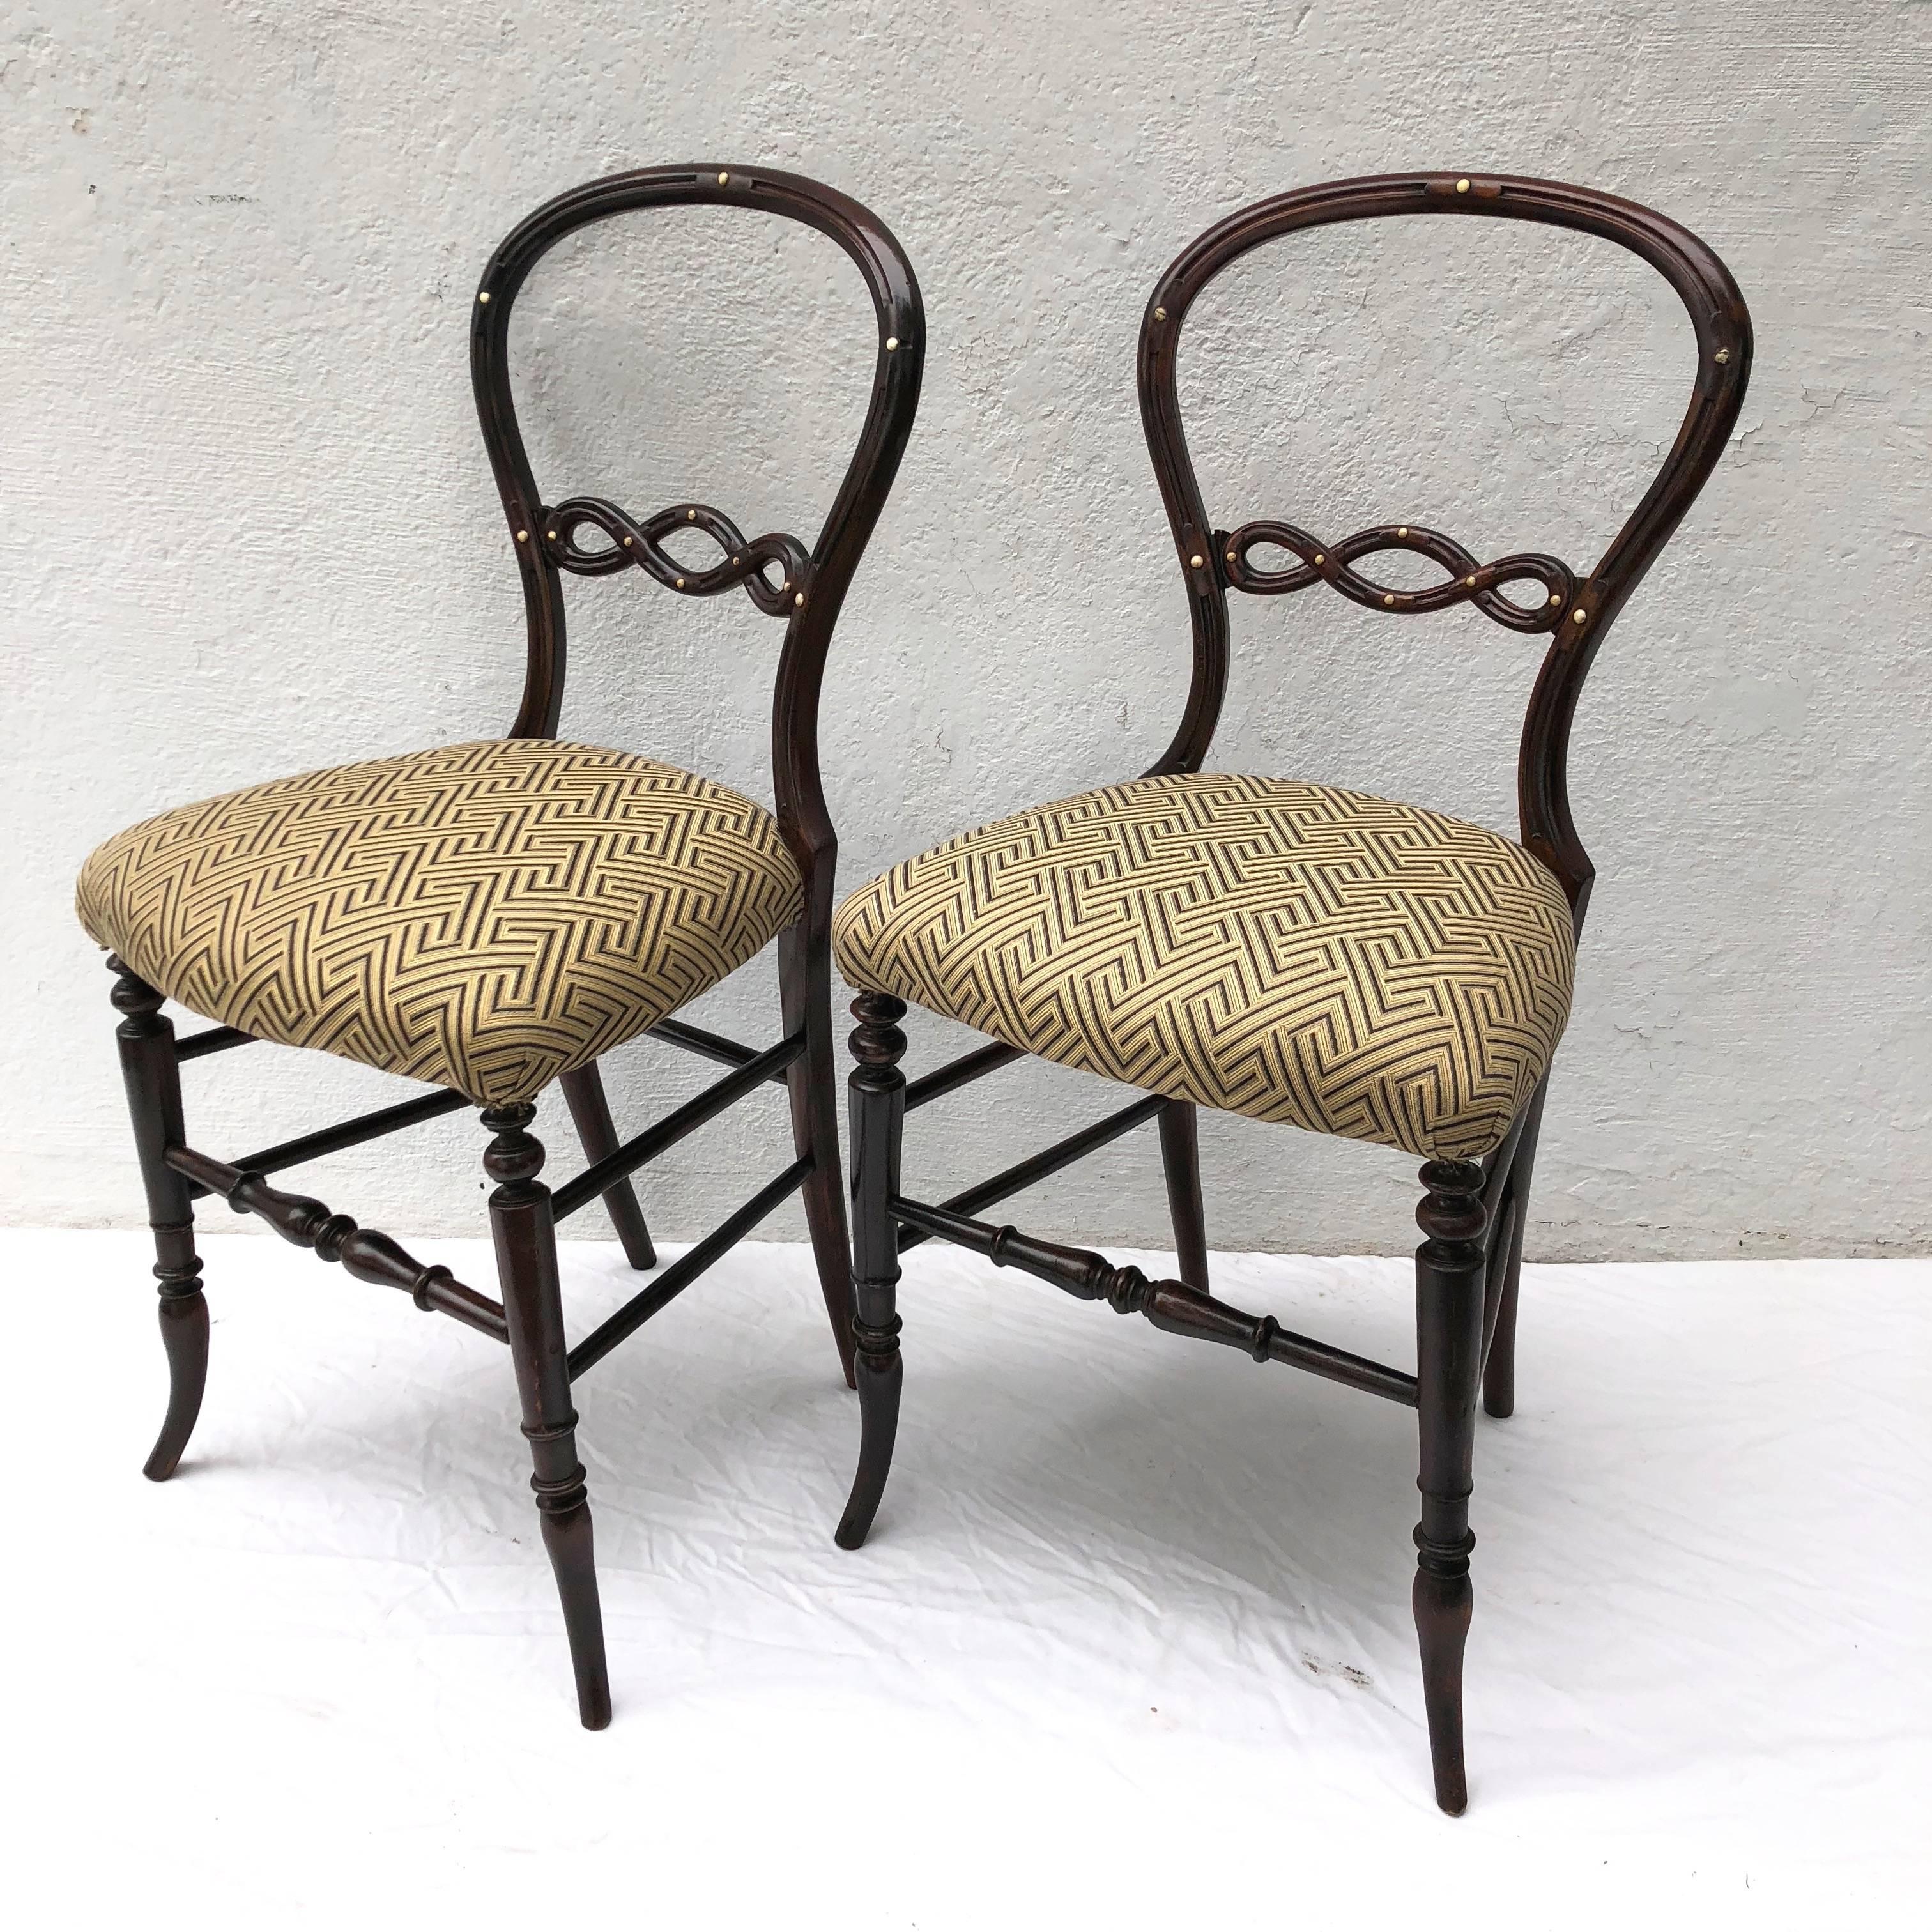 Exquisite pair of English diminutive side chairs having a sensuous circular back with inlaid detail.